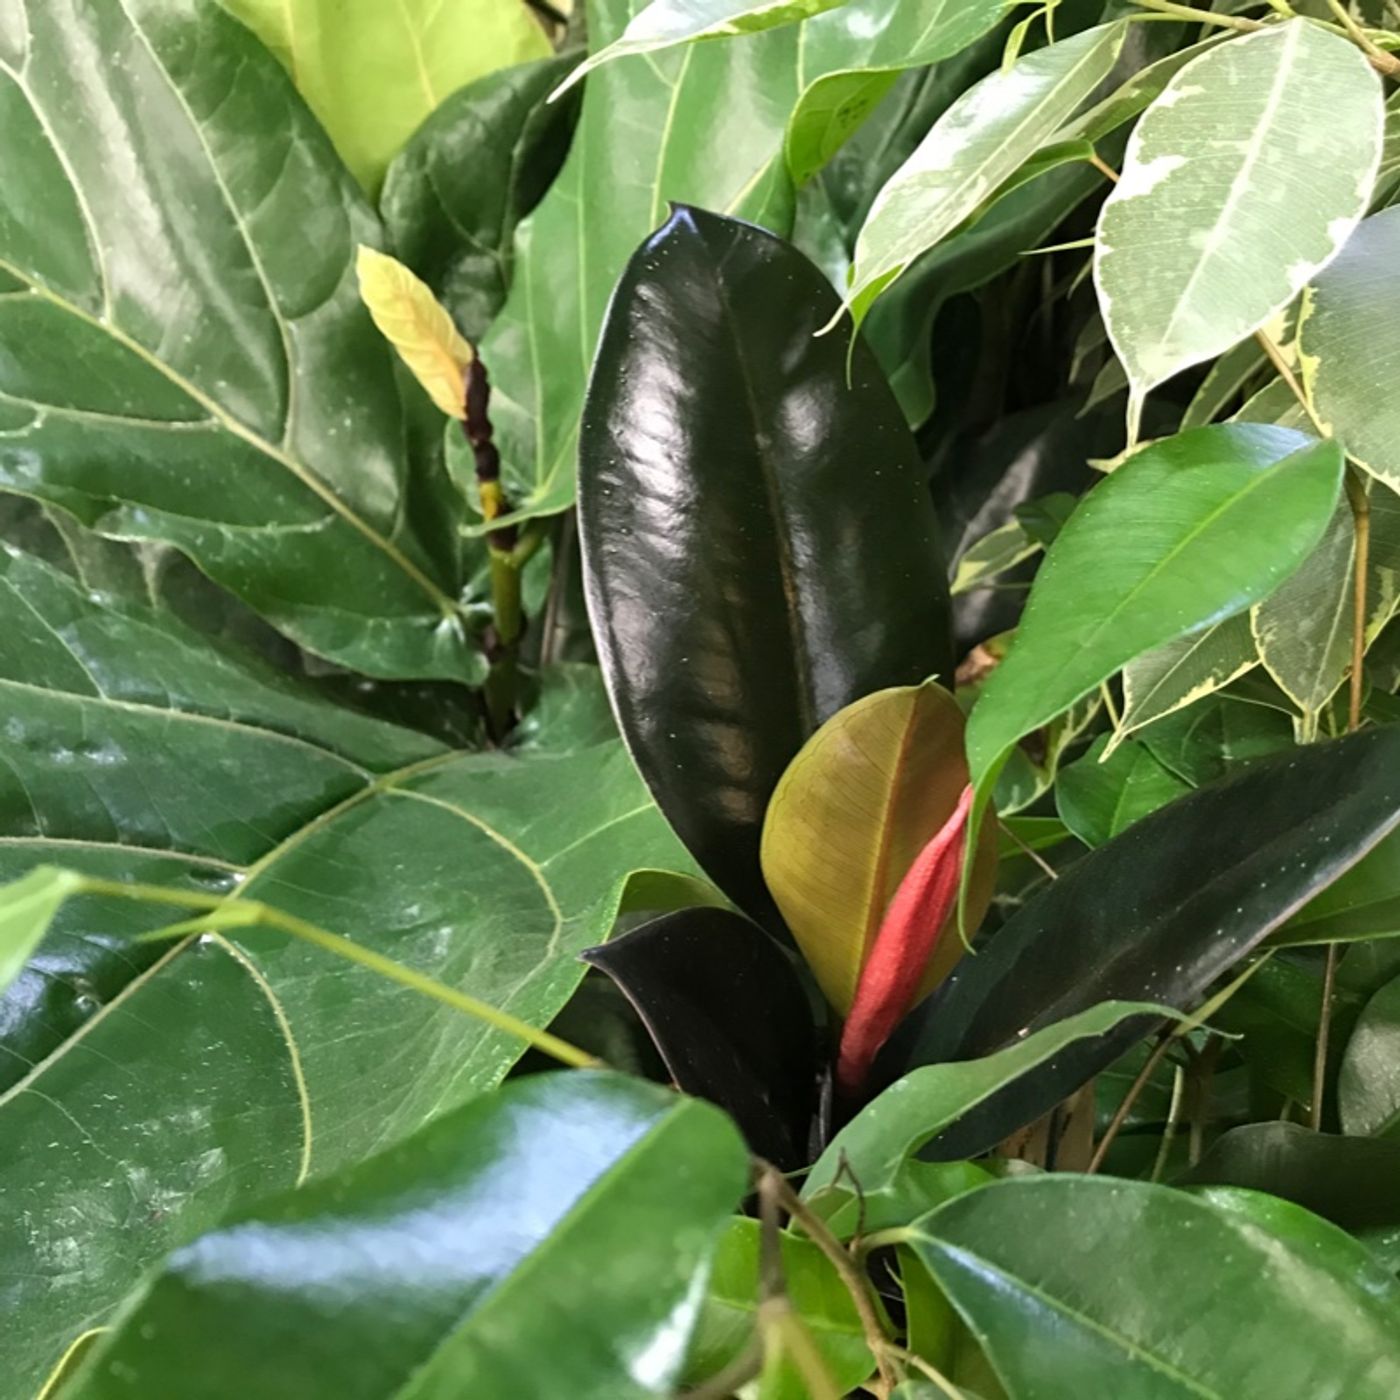 Episode 72 - Ficus propagation and diseases